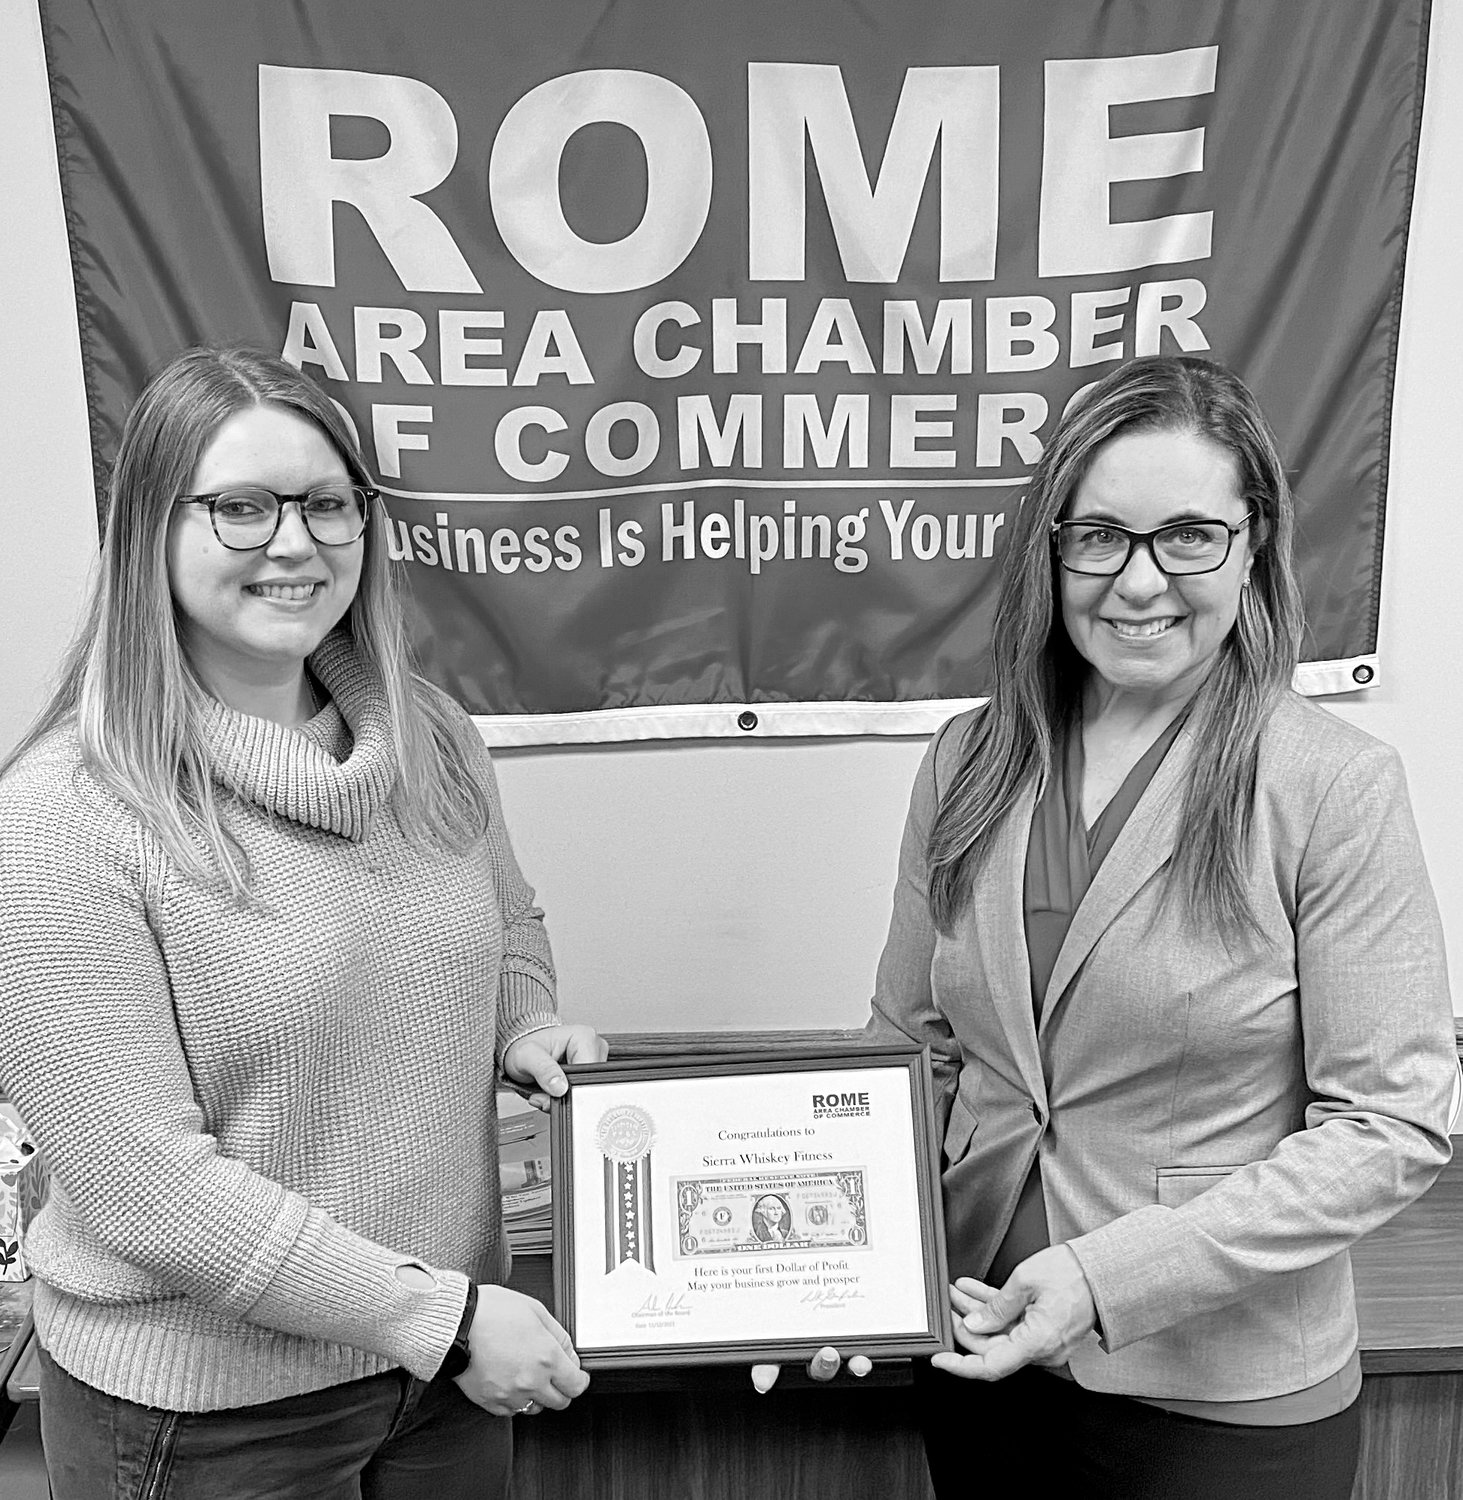 FIRST DOLLAR OF PROFIT - Sierra Rathbun, CPT and owner of Sierra Whiskey Fitness, accepts a First Dollar of Profit award from Lori Frieden, Coldwell Banker Faith Properties and Board member of the Rome Chamber of Commerce.  â€œIt all started in the summer of 2018 after returning from overseas service in the Air Force.  The first thing on my to-do list was to have a dog.  I was able to get my new best friend Whiskey (aka The Fluffy Golden Monster) back soon after.  Since that day, she has been my coach and training partner.  I discovered that having a dog only increased my physical activity and improved my mental health.  Fast forward to 2021, Sierra Whiskey Fitness was born with an emphasis on embracing fitness as a way of life.  Rathbun, a NASM Certified Personal Trainer, seeks to help individuals identify goals and help them design and guide them with a personalized exercise program.  For more information, go online at https://www.sierrawhiskeyfitness.com, Facebook @sierrawhiskeyfitness or call 315-335-3117.  (Photo submitted)